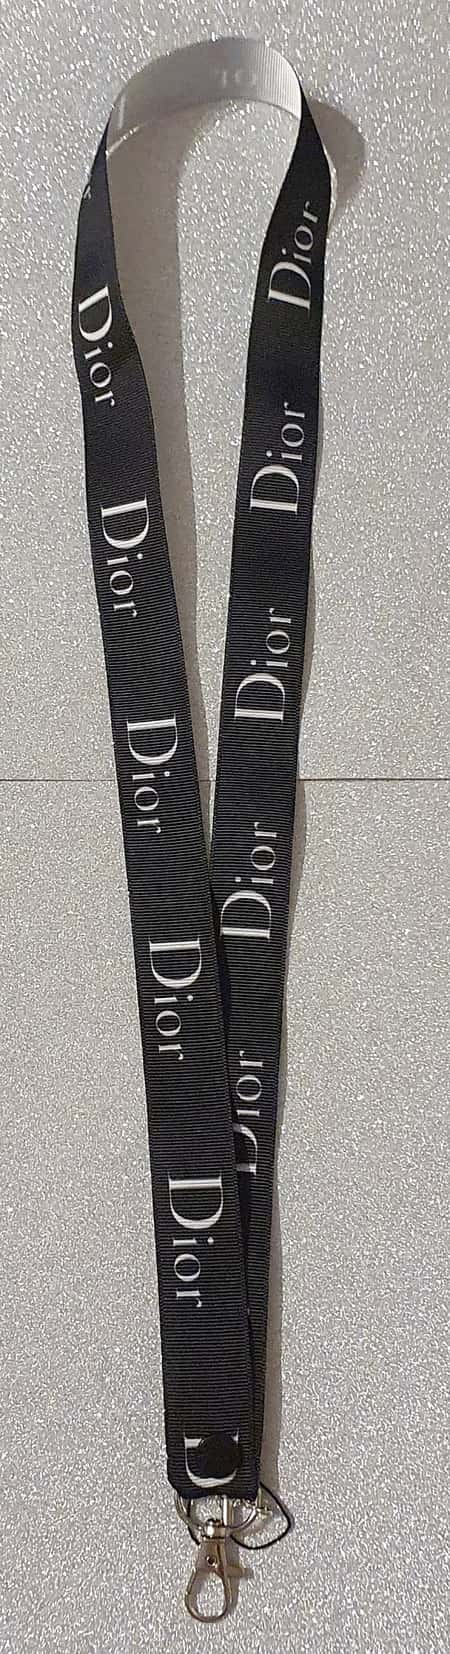 Childs Adults Dior Lanyard Id Badge Holder